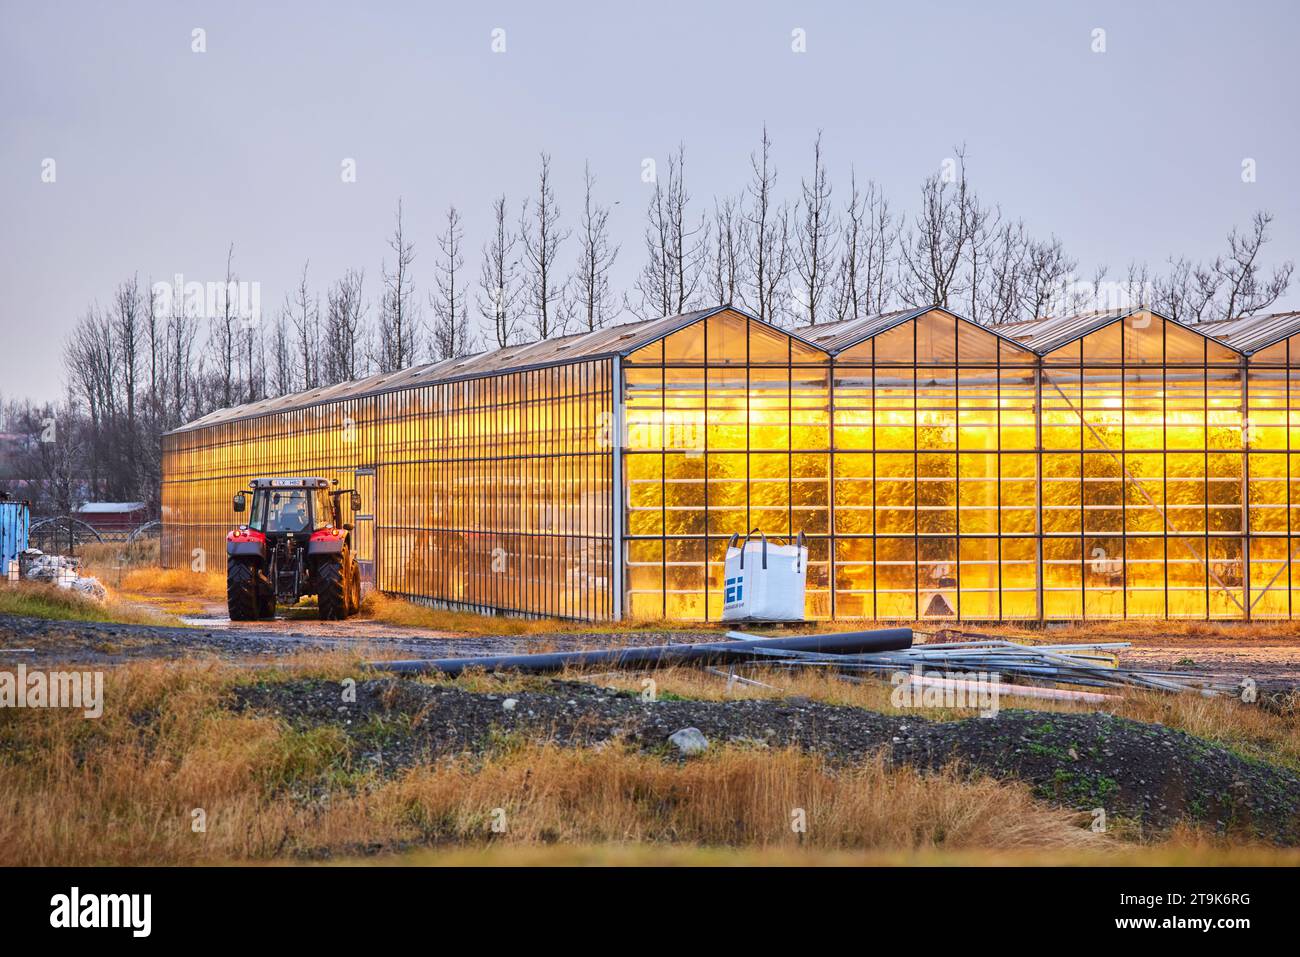 Iceland heat greenhouses with geothermal water Stock Photo